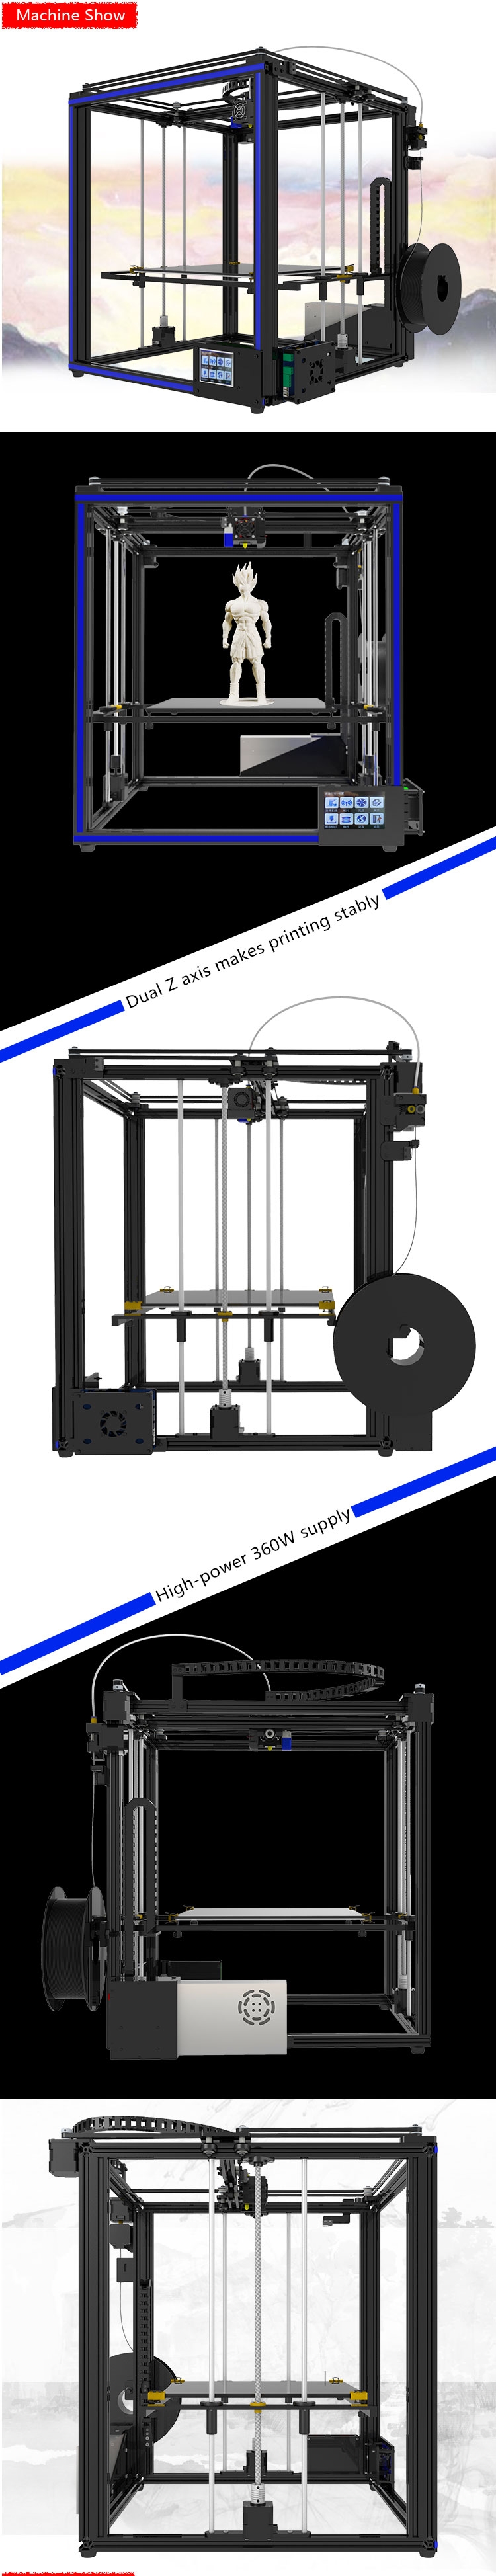 TRONXY® X5SA DIY Aluminium 3D Printer 330*330*400mm Printing Size With Updated Touch Screen/Auto Leveling/Dual Z-axis/Power Resume 8